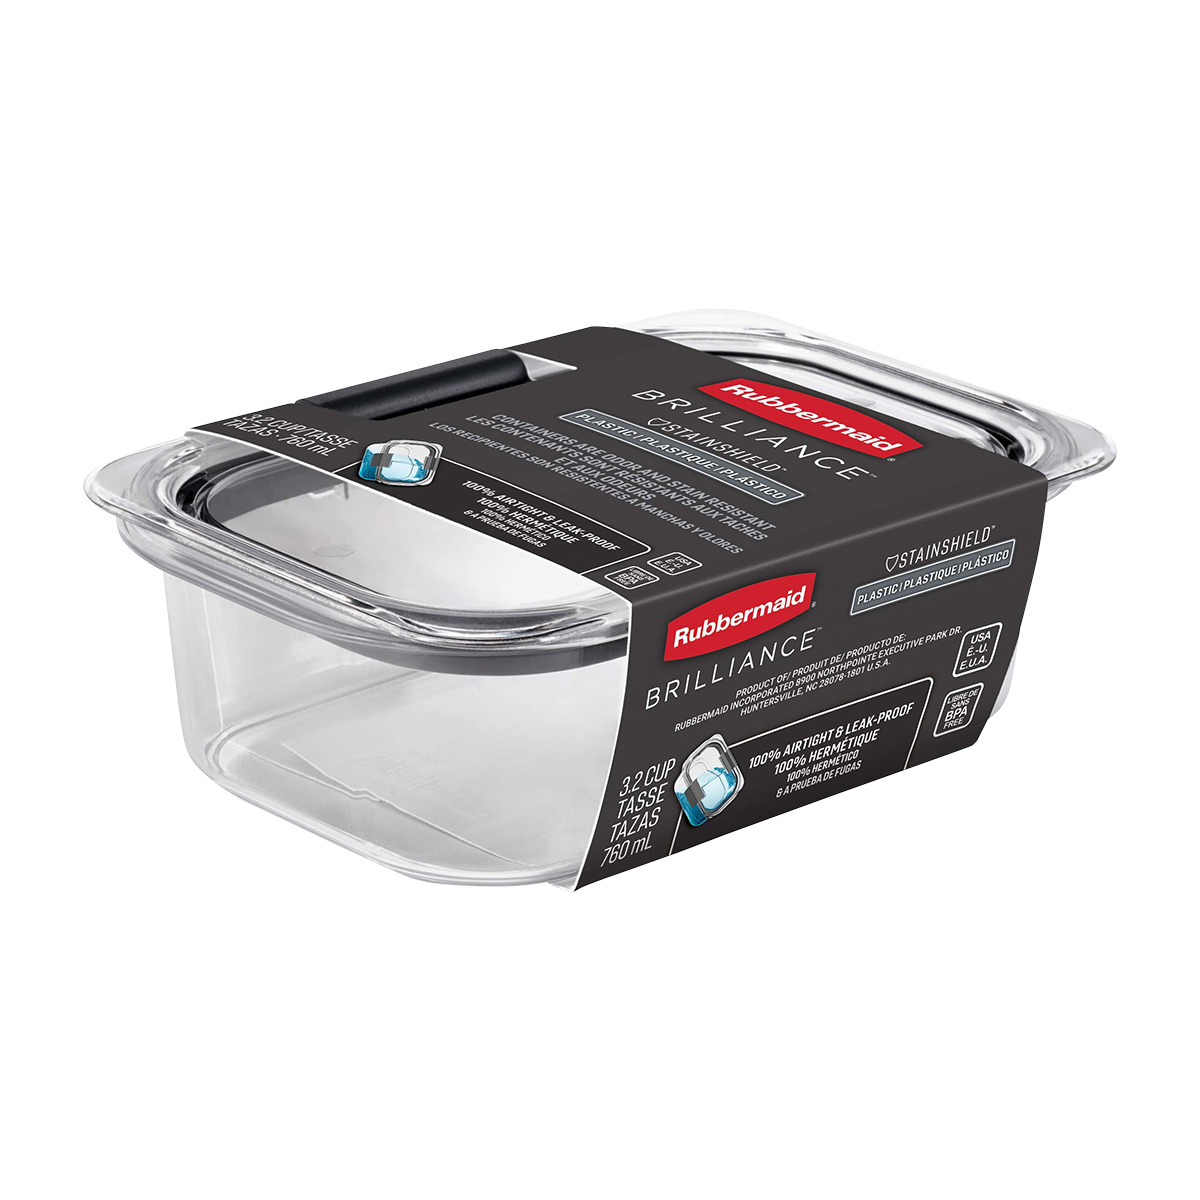 https://www.containerstore.com/catalogimages/498215/10096072-2183403_01-rubbermaid-ven.jpg